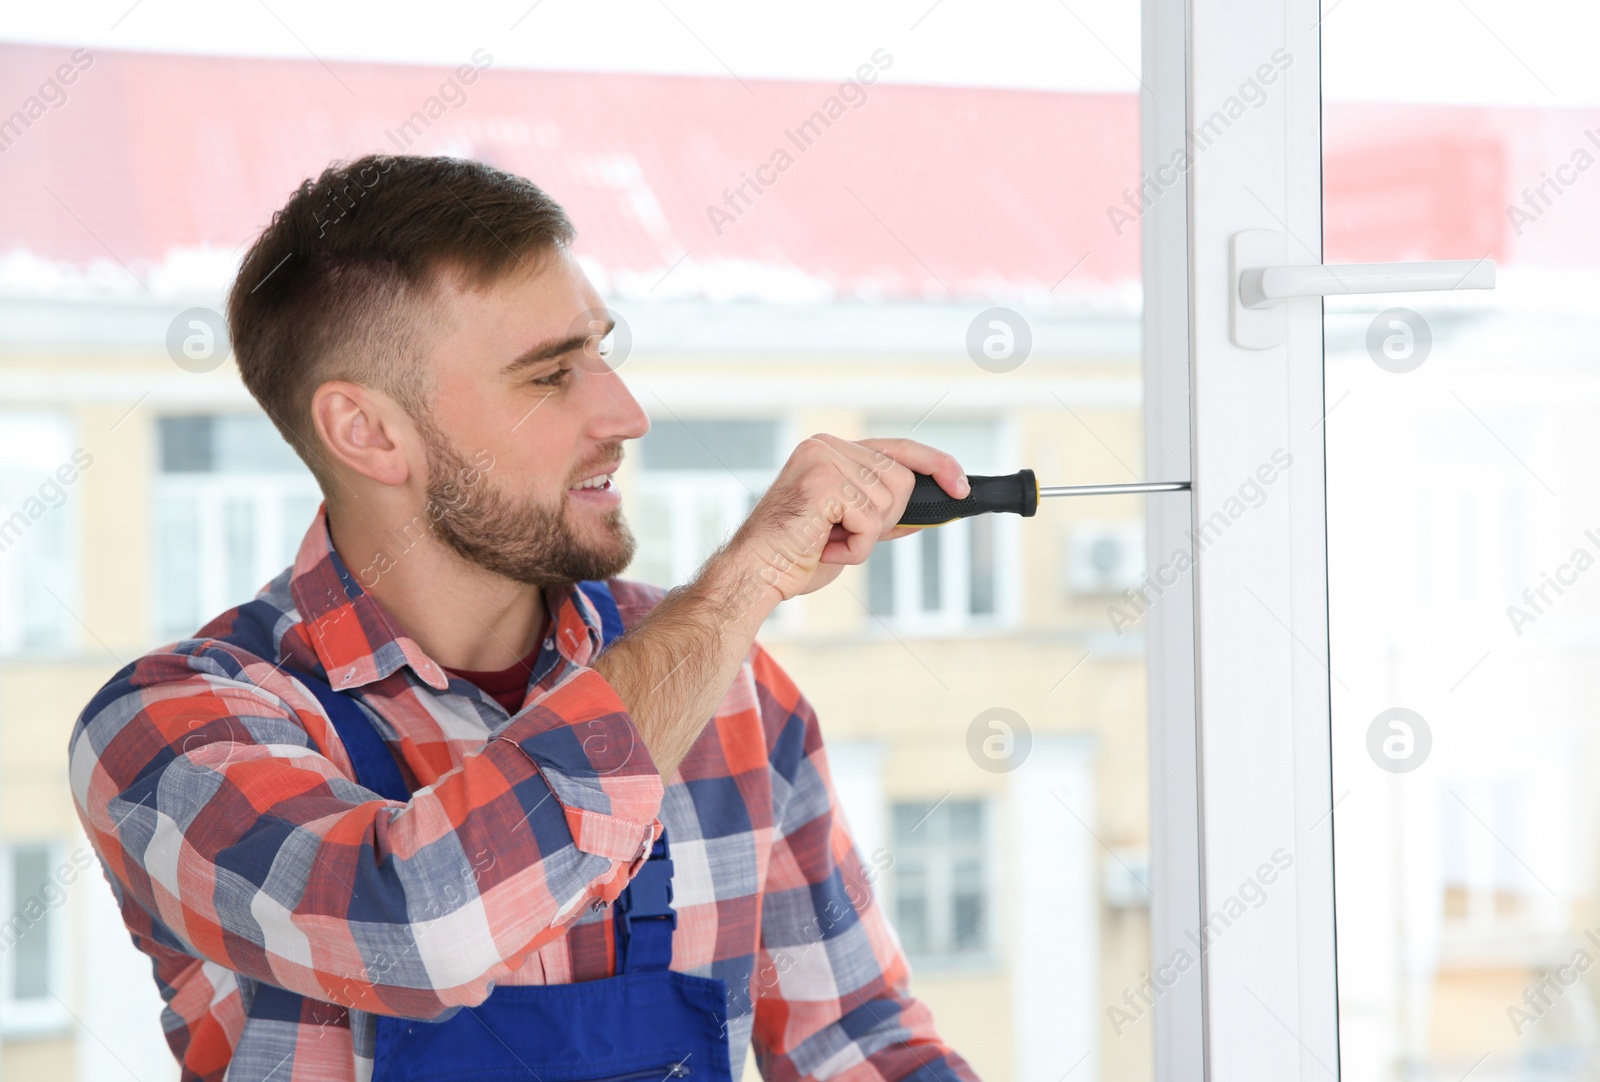 Photo of Construction worker adjusting installed window with screwdriver indoors